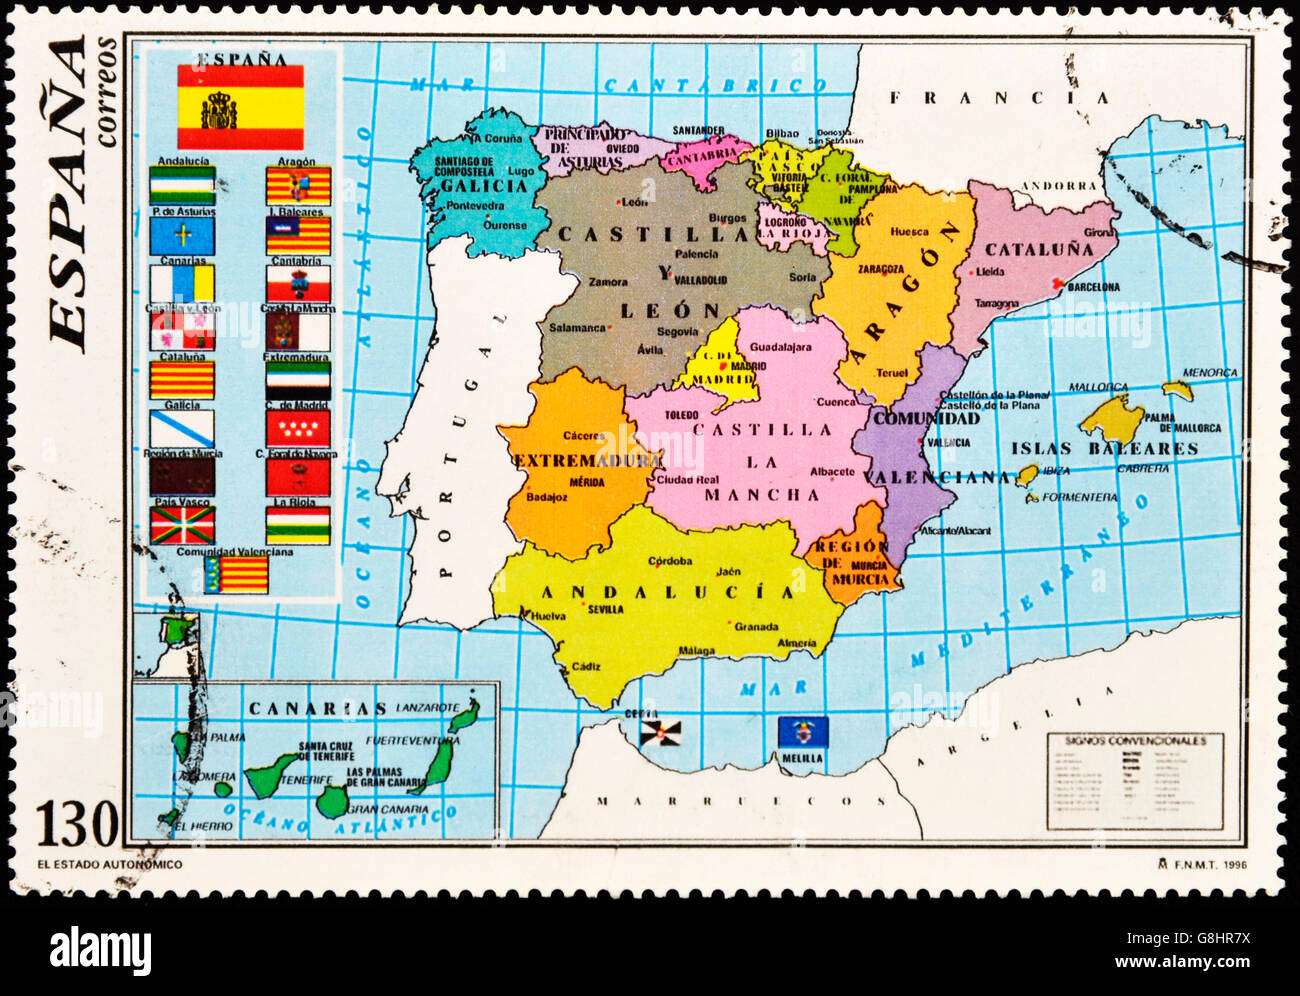 SPAIN - CIRCA 1996: A stamp printed in Spain shows the map of Spain with the Autonomous Communities, circa 1996 Stock Photo